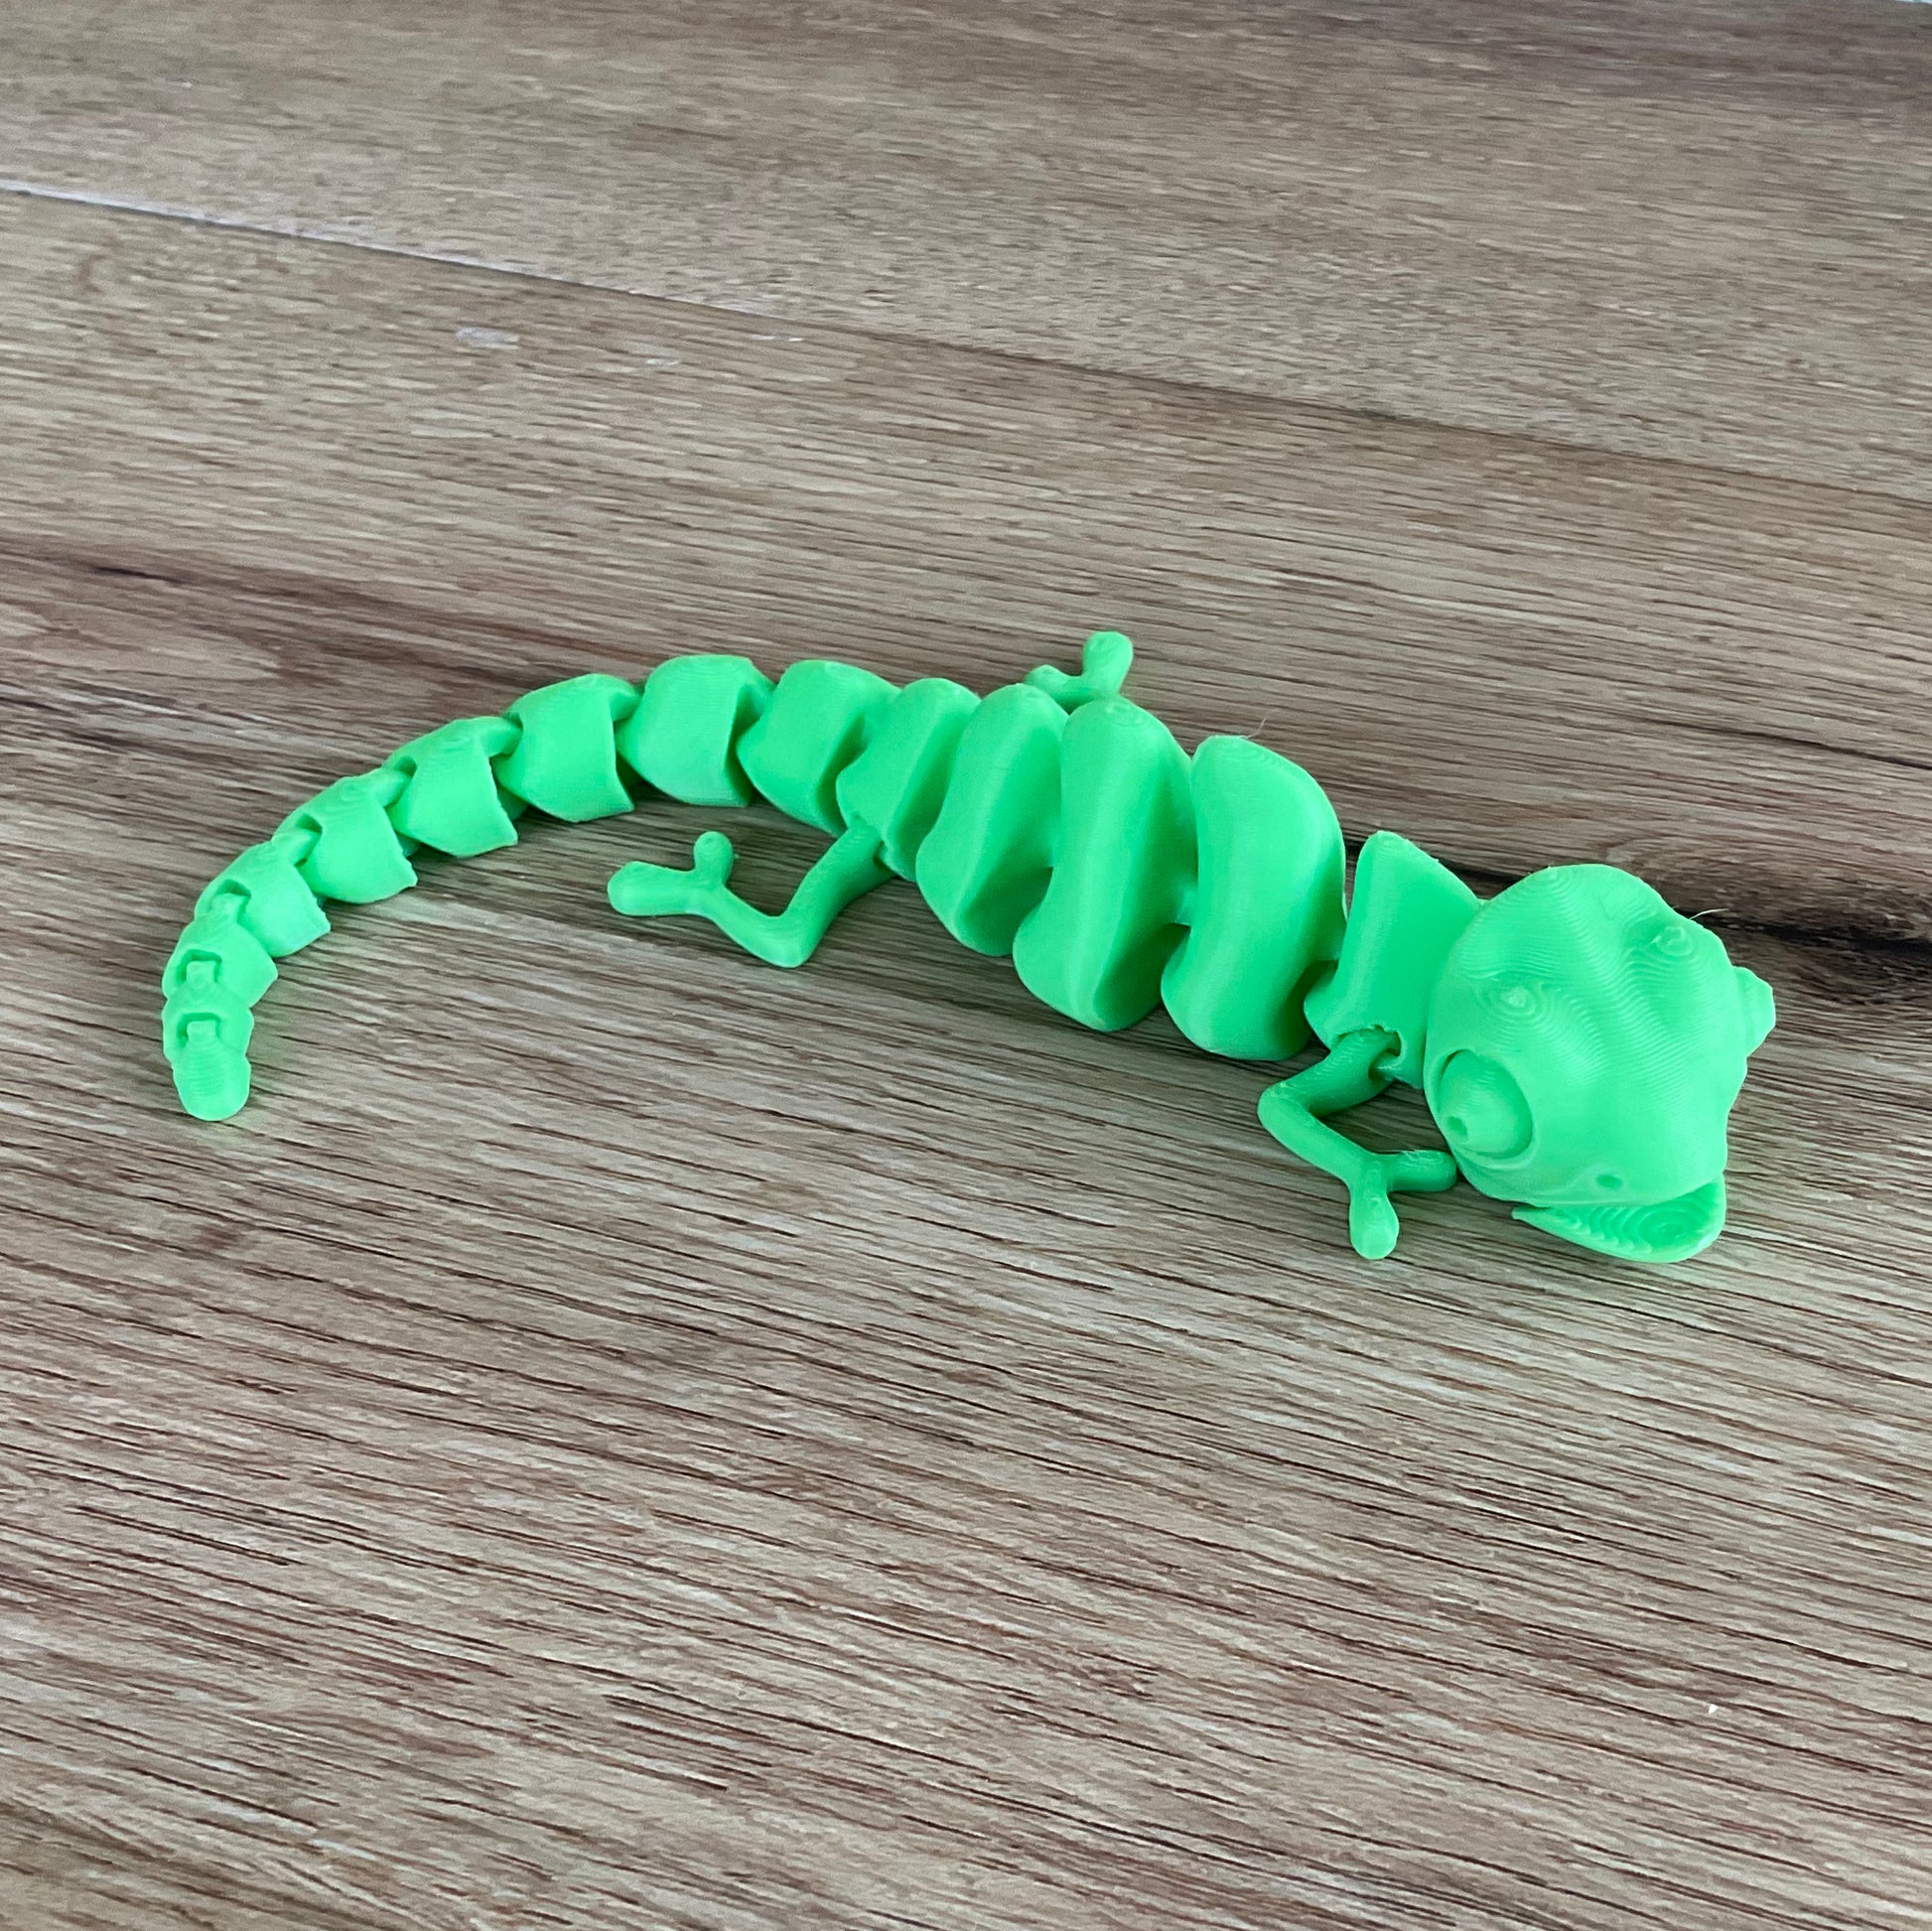 a picture of the Chameleon fidget toy in green.